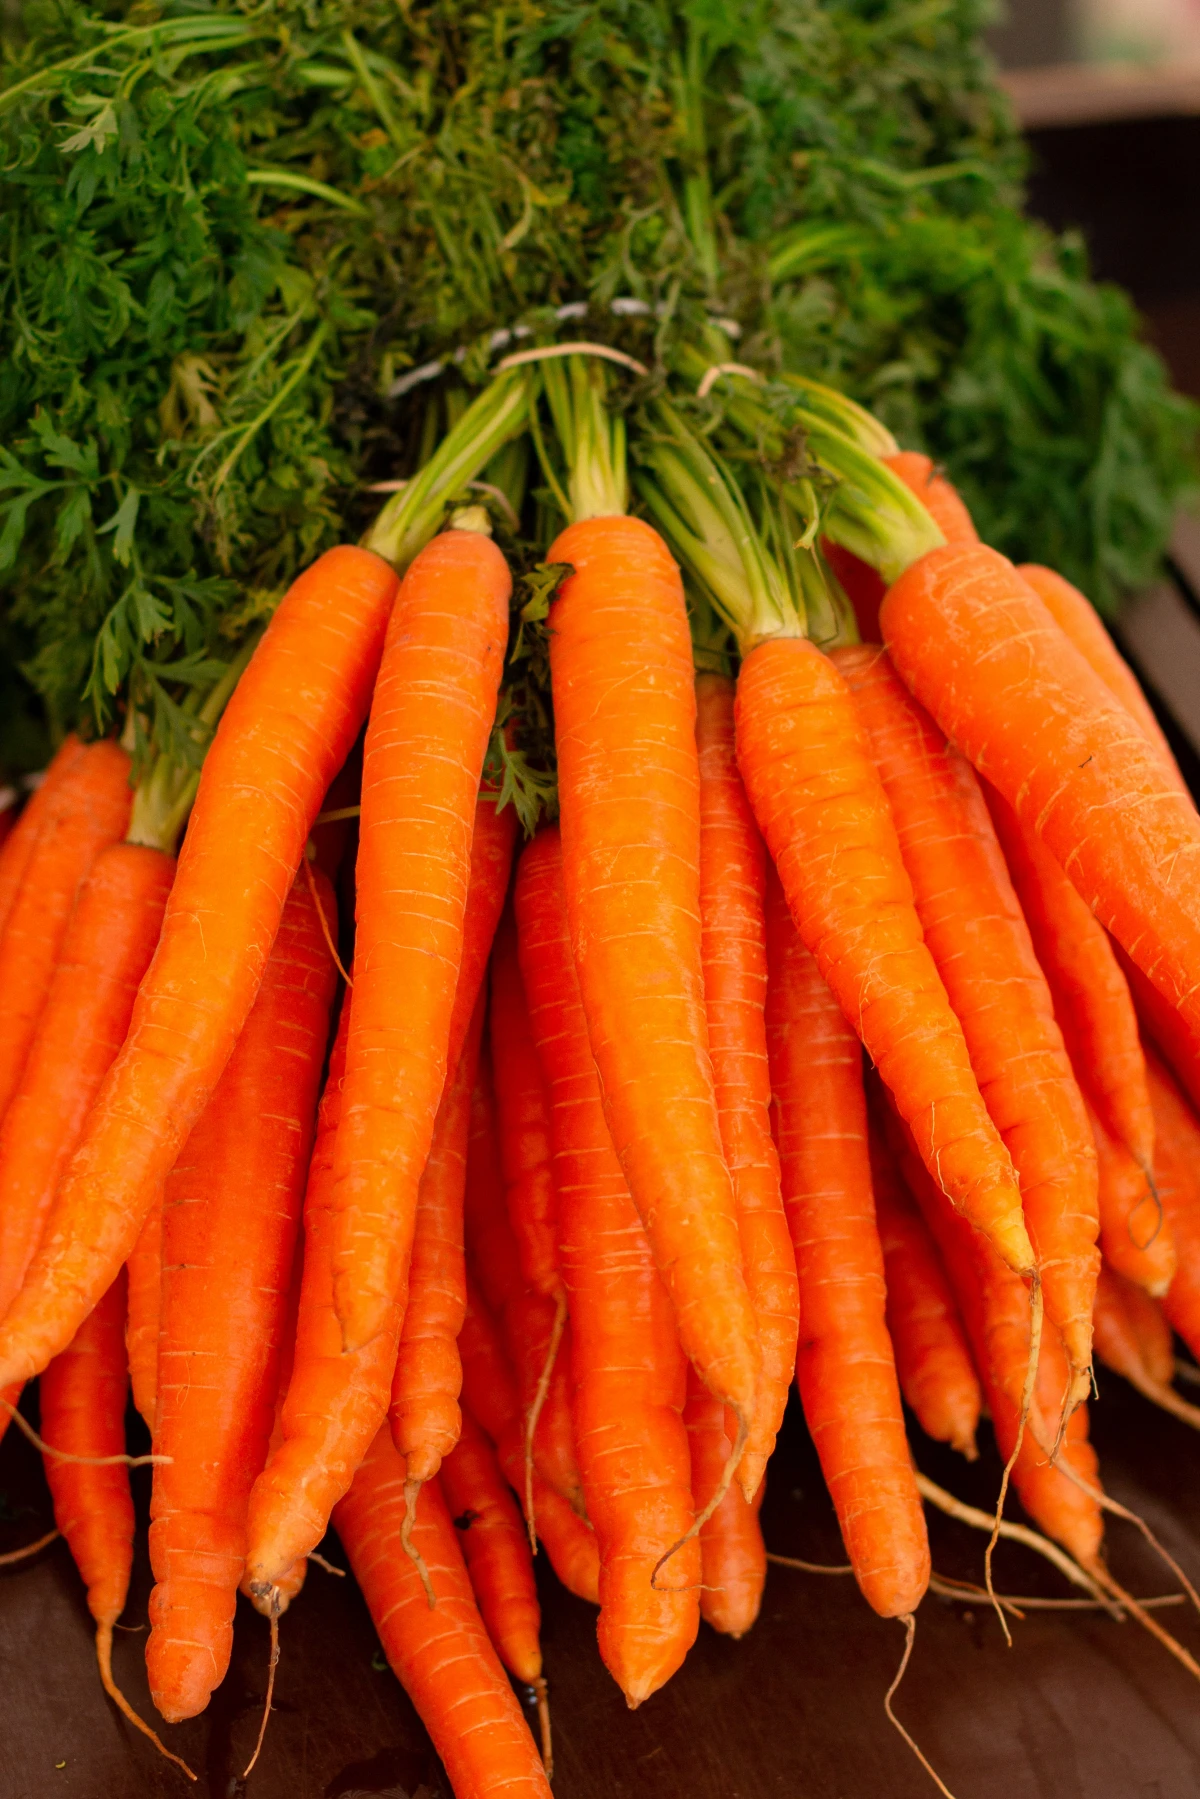 how to improve eyesight bunch of carrots